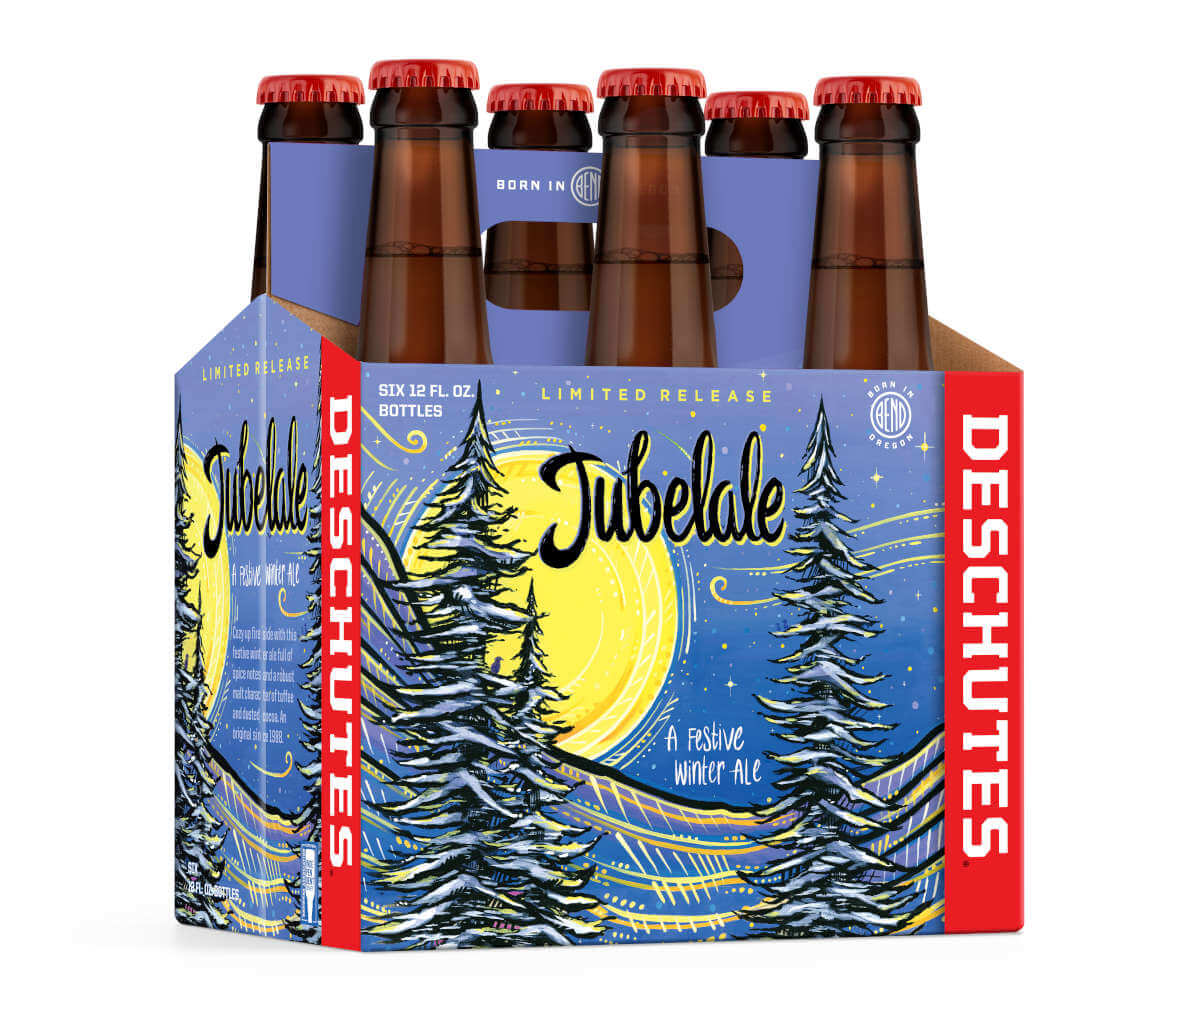 Deschutes Brewery Jubelale is out now, and in cans for the first time